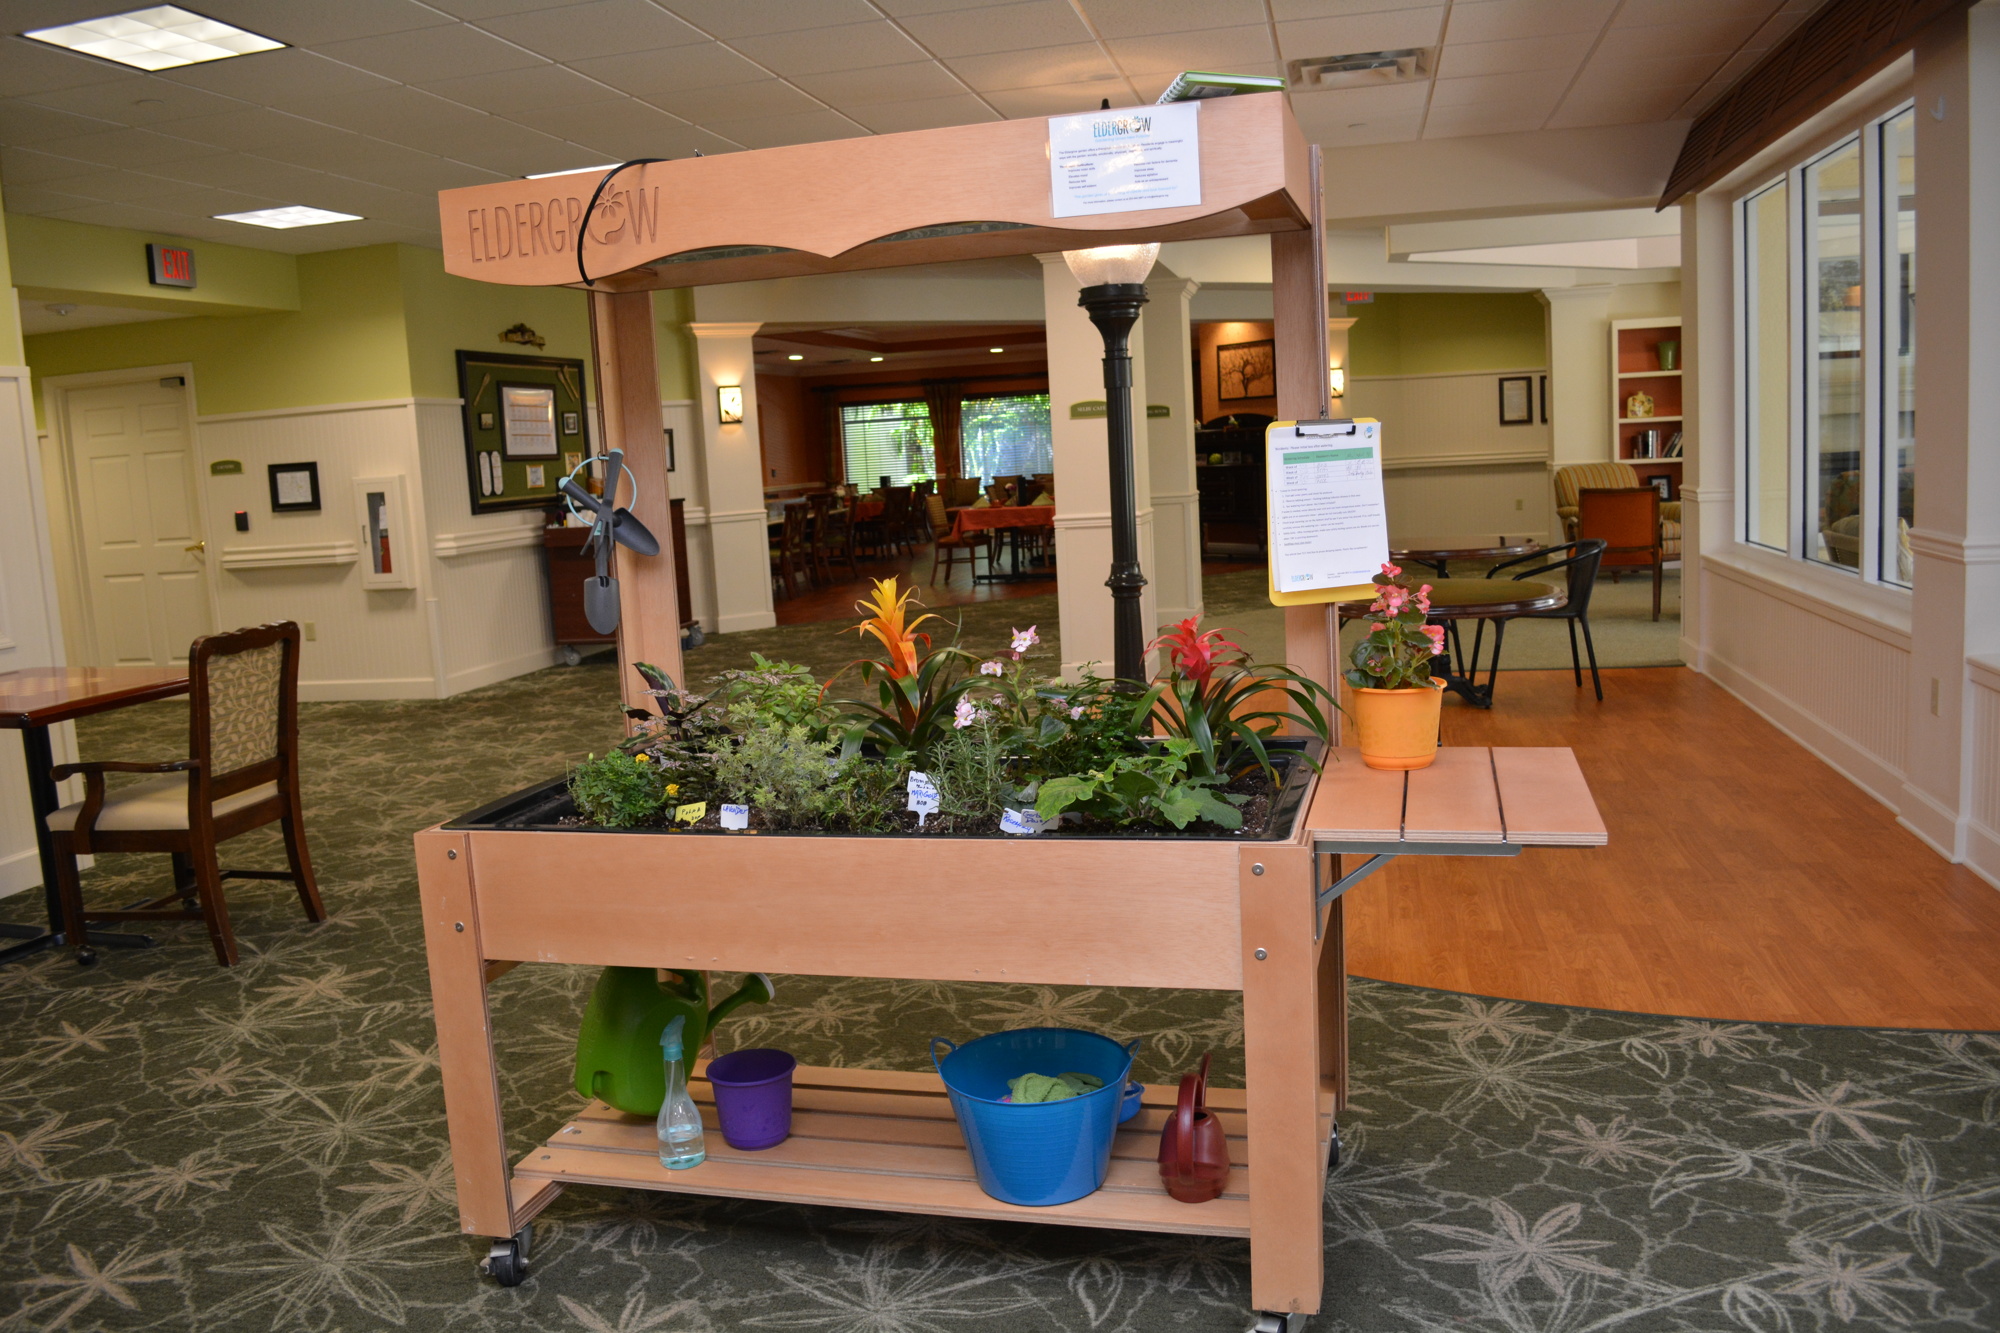 The therapy garden uses indoor grow lights to grow plants. Eldergrow teachers say horticultural therapy stimulates senses and memory, reduces dementia risk factors and improves motor skills, self-esteem and sleep. cv